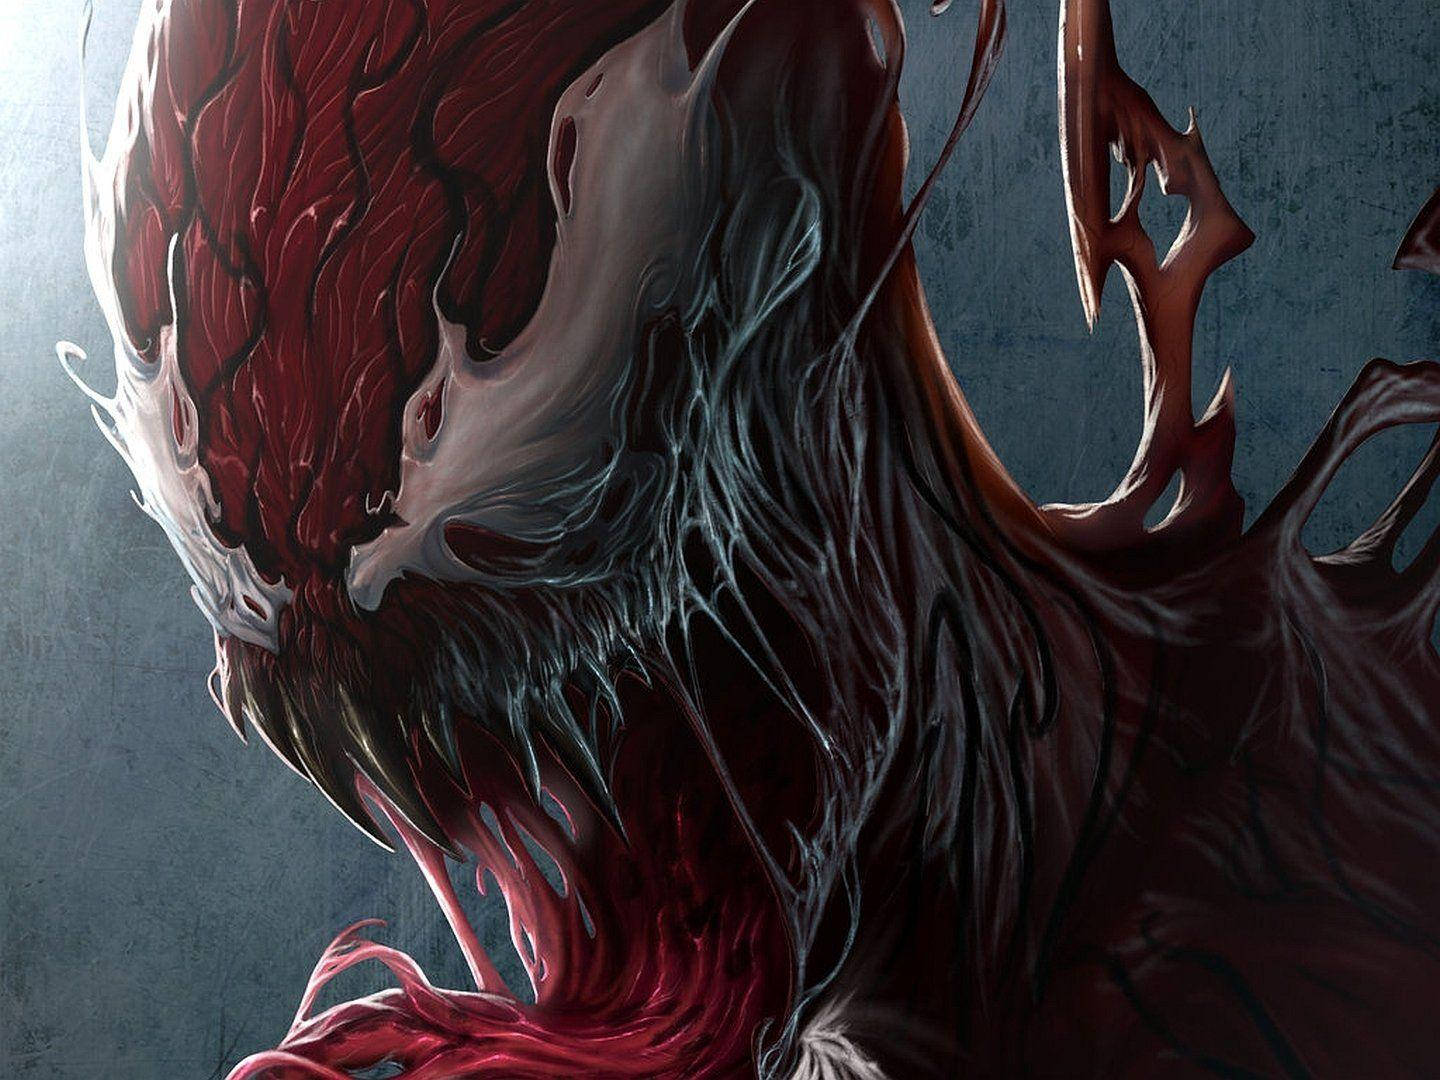 Top 999+ Carnage Wallpaper Full HD, 4K✅Free to Use